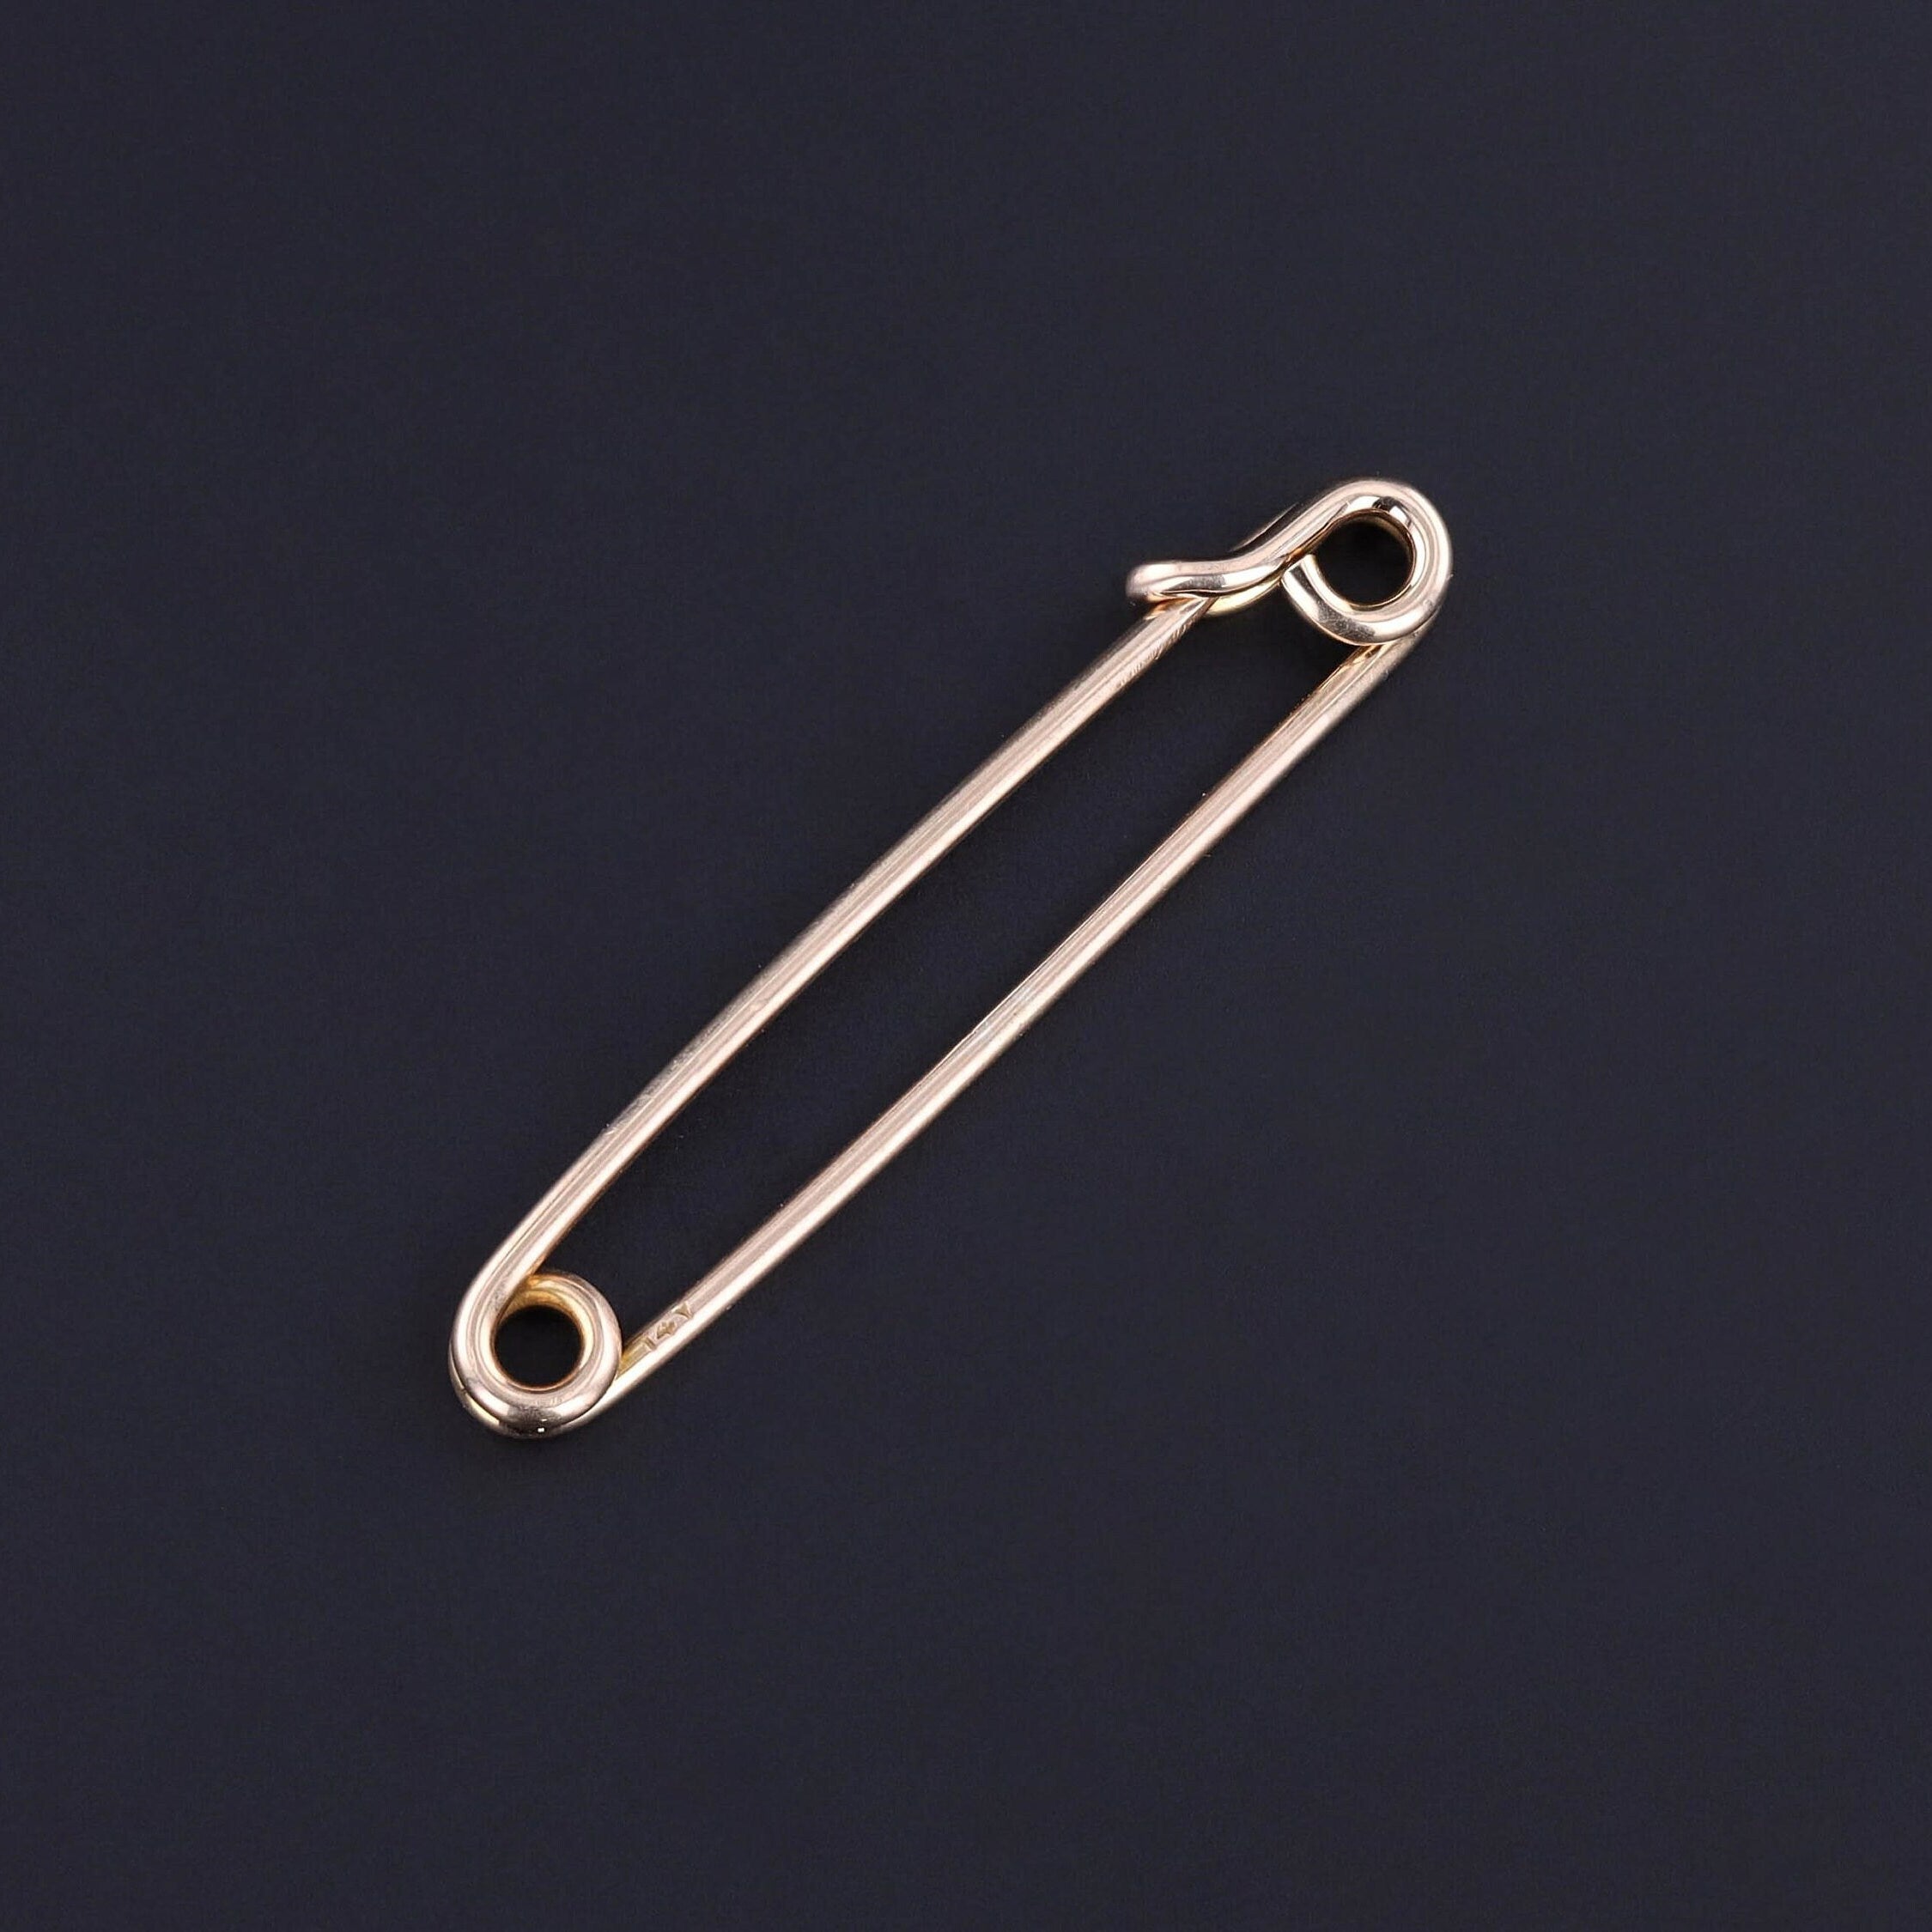 silver safety pin